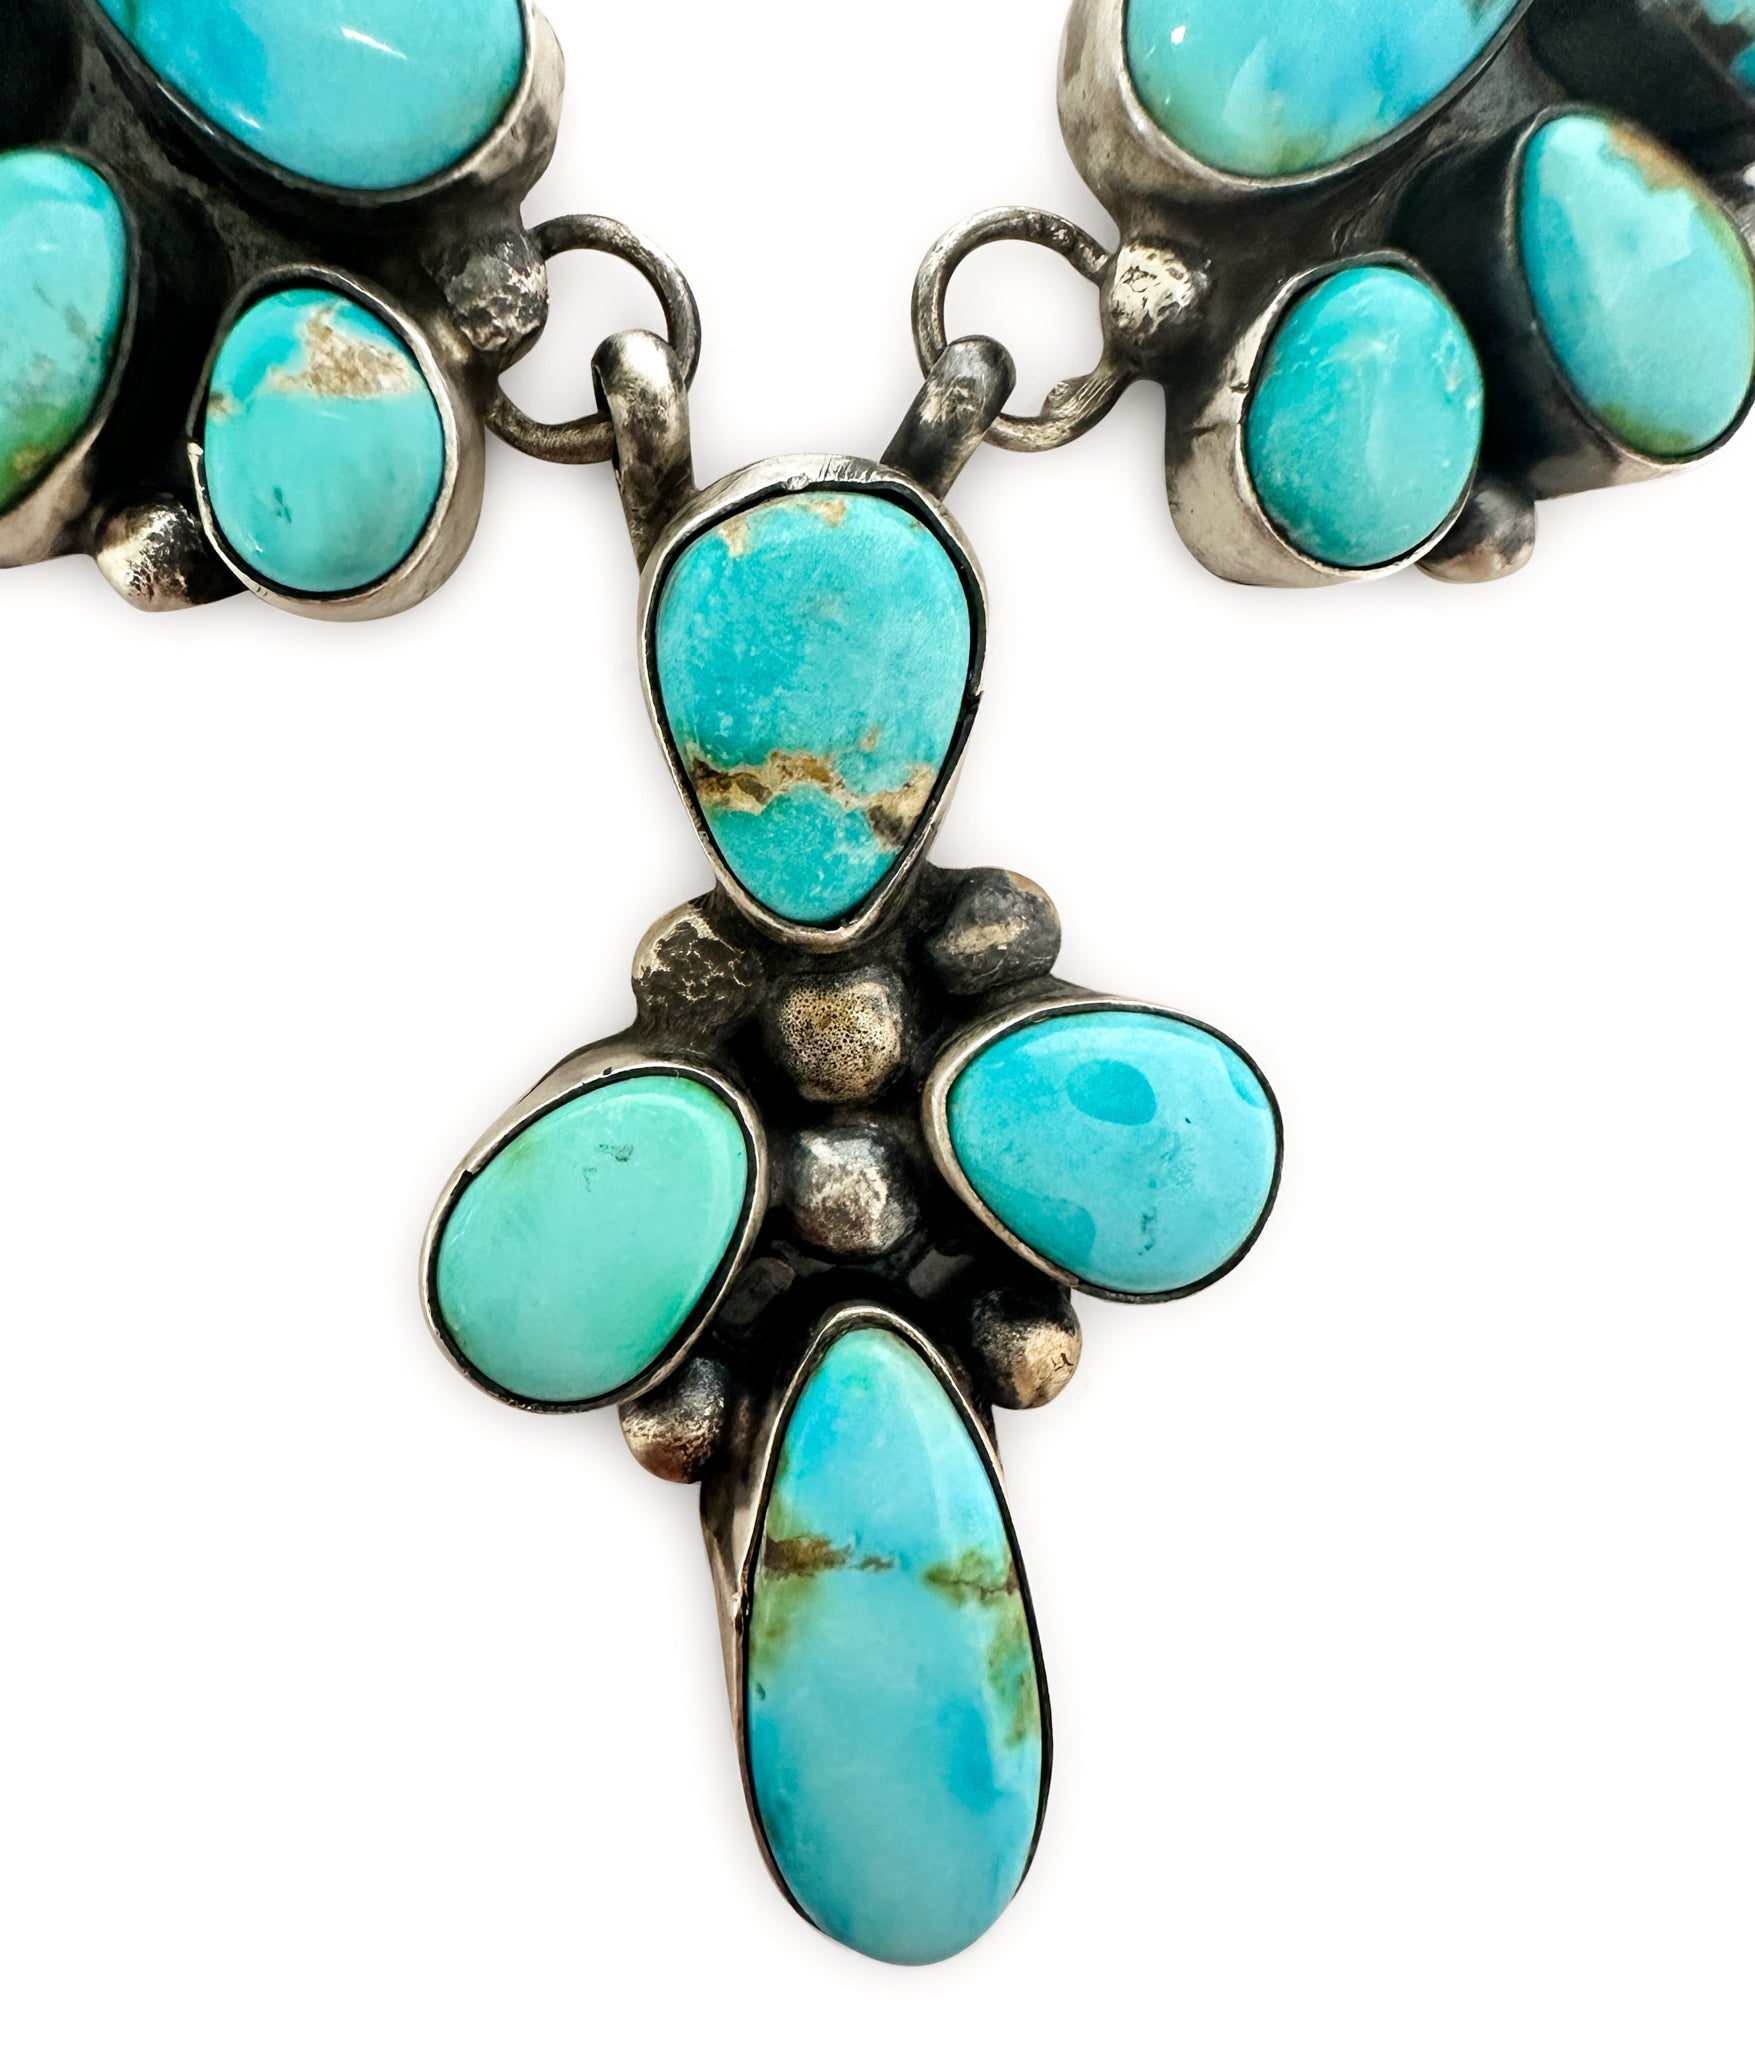 Carrizozo Sonoran Gold Authentic Turquoise Necklace